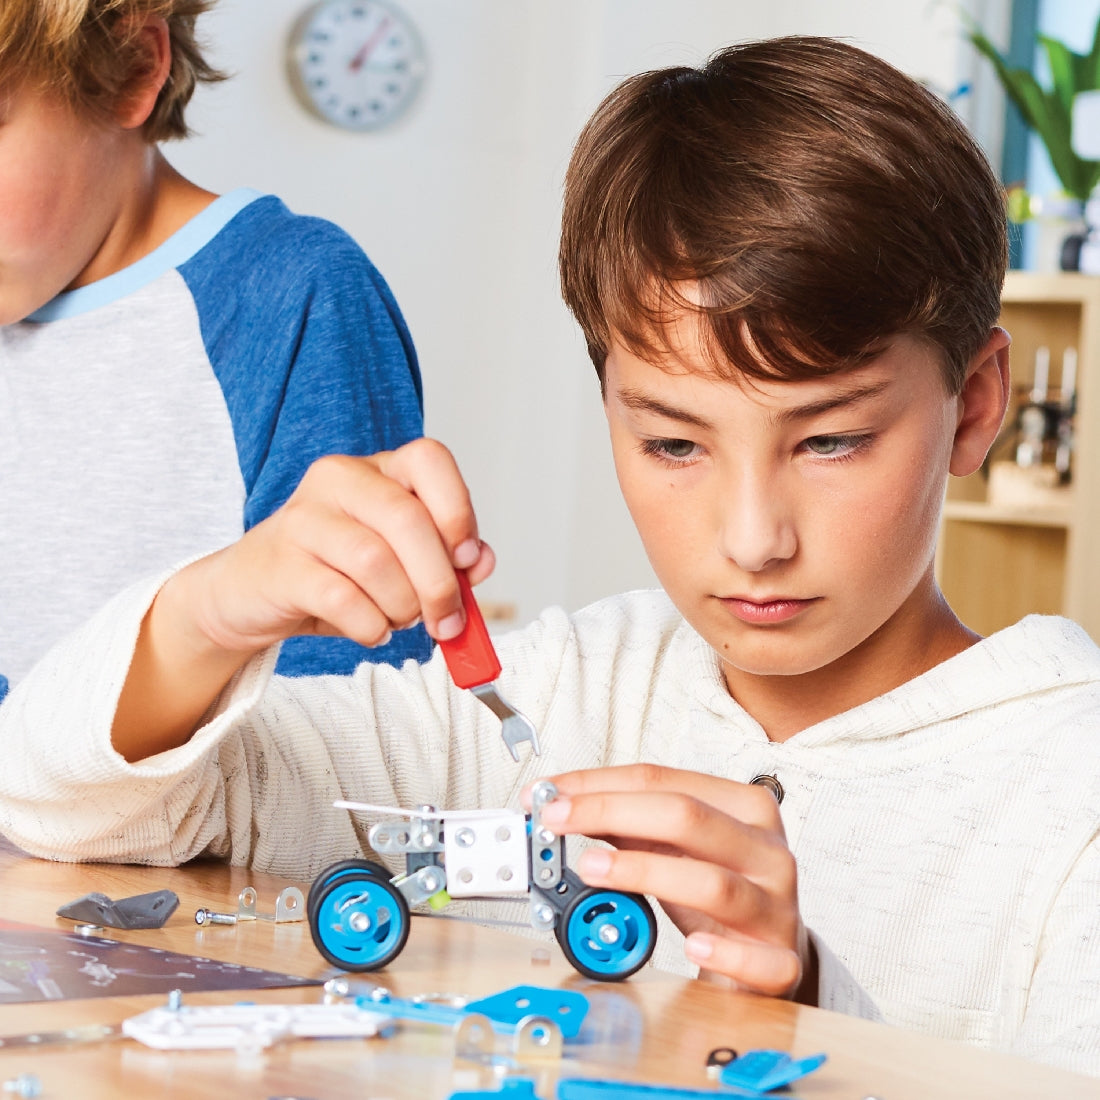 MECCANO QUICK BUILDS INNOVATION SETS